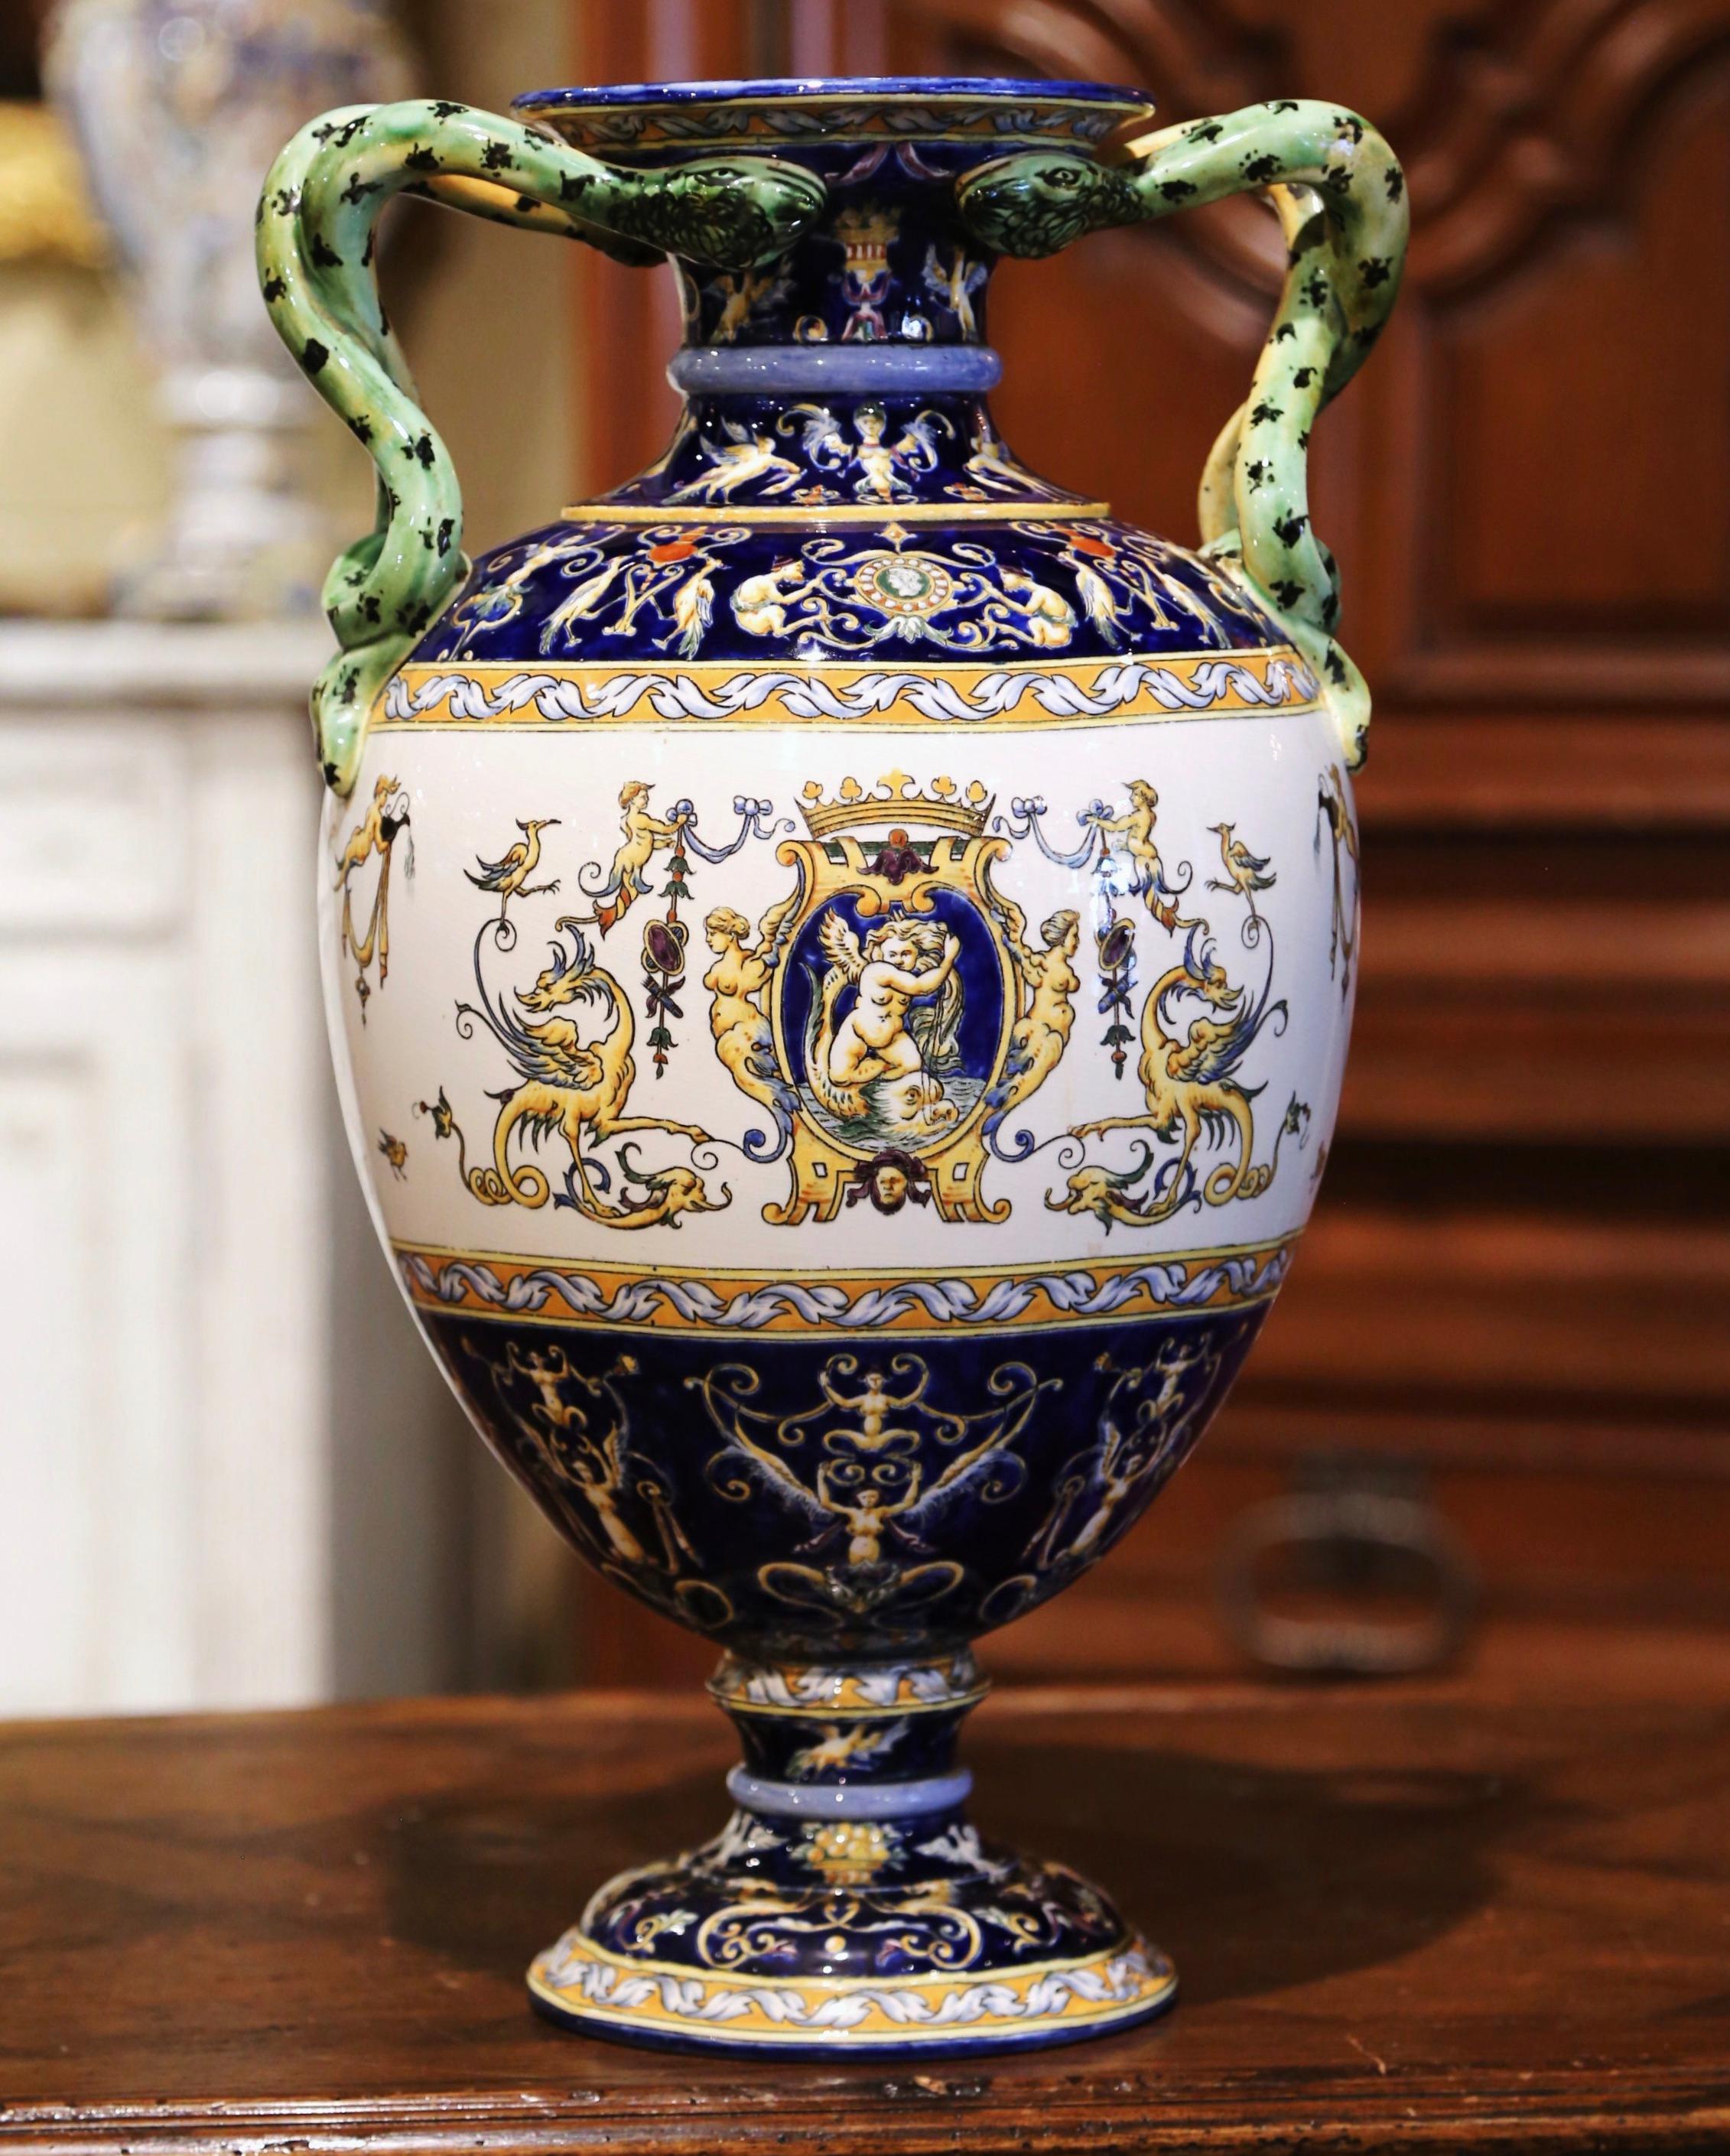 Created in France circa 1890 by the faiencerie de Gien, the antique vase is round in shape and stands on a circular base decorated with bird and leaf motifs. The large vessel features two twisted snake handles over the colorful rim and wide neck.